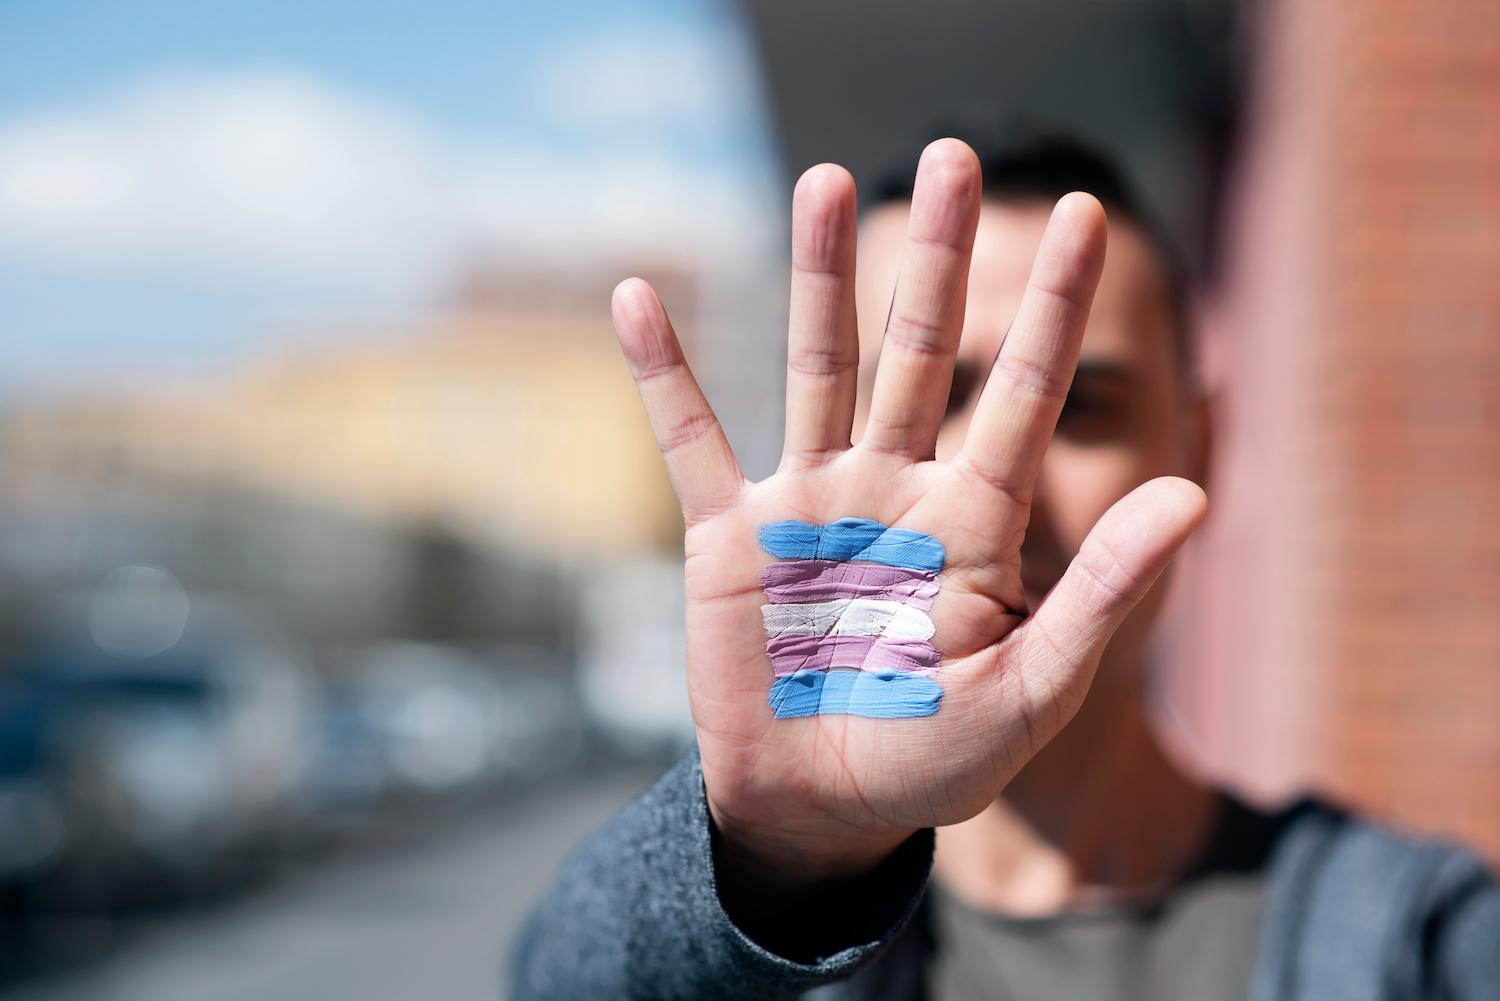 Man with transgender flag painted on the palm of his hand - transgender rights - transitioning